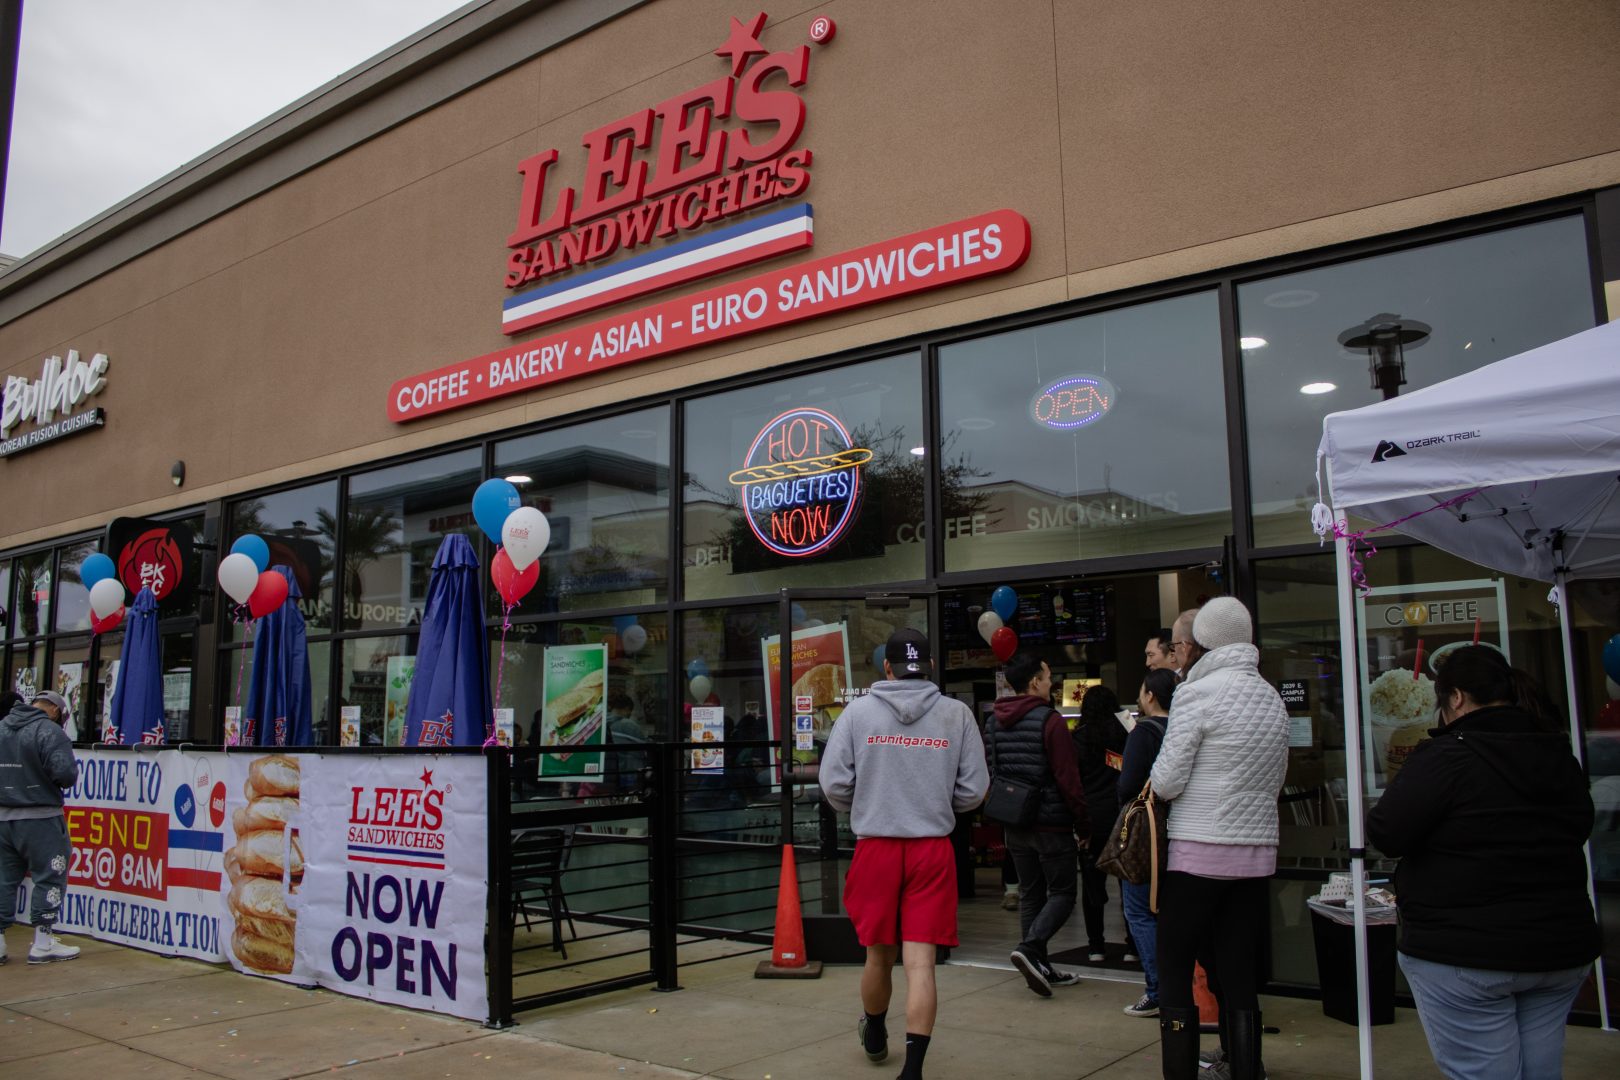 Lees Sandwiches opened on Jan. 8 at Campus Pointe. (Diego Vargas/The Collegian)